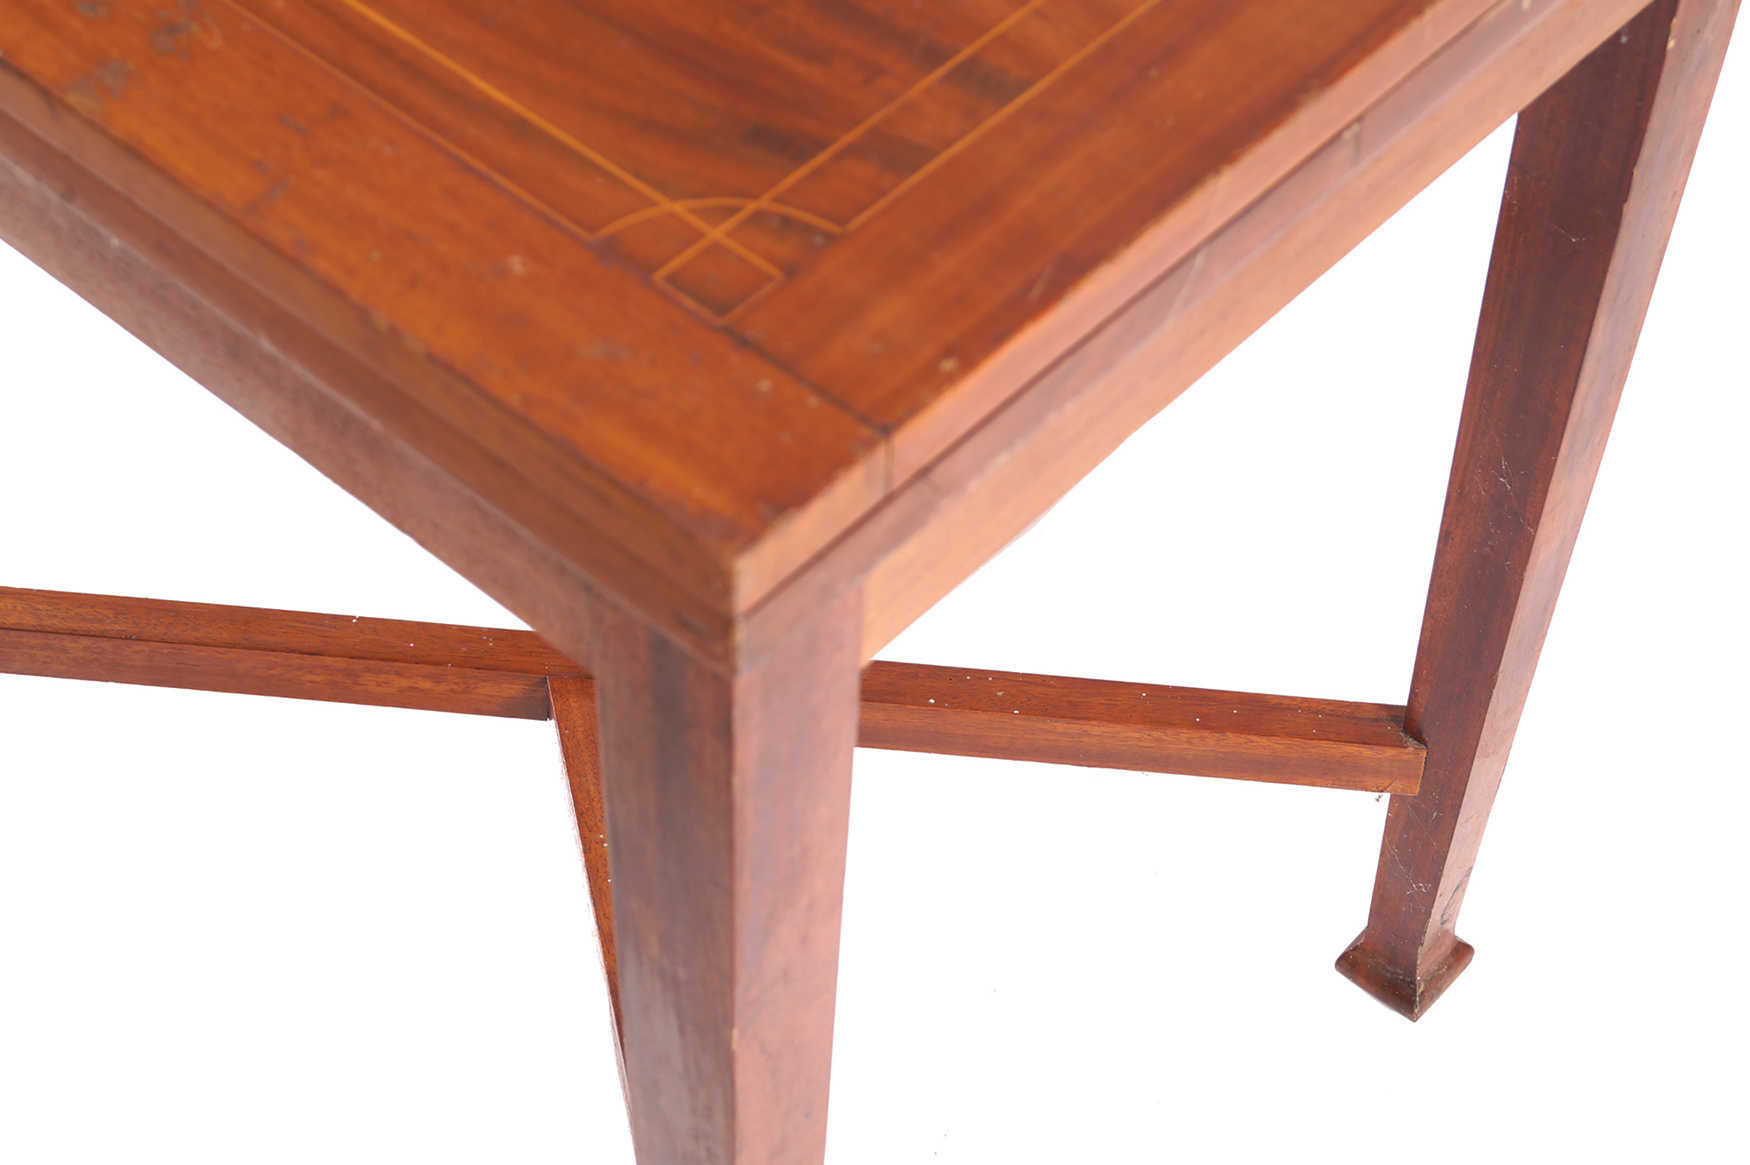 EDWARDIAN PERIOD MAHOGANY AND BOXWOOD INLAID DRAW LEAF DINING TABLE - Image 4 of 4